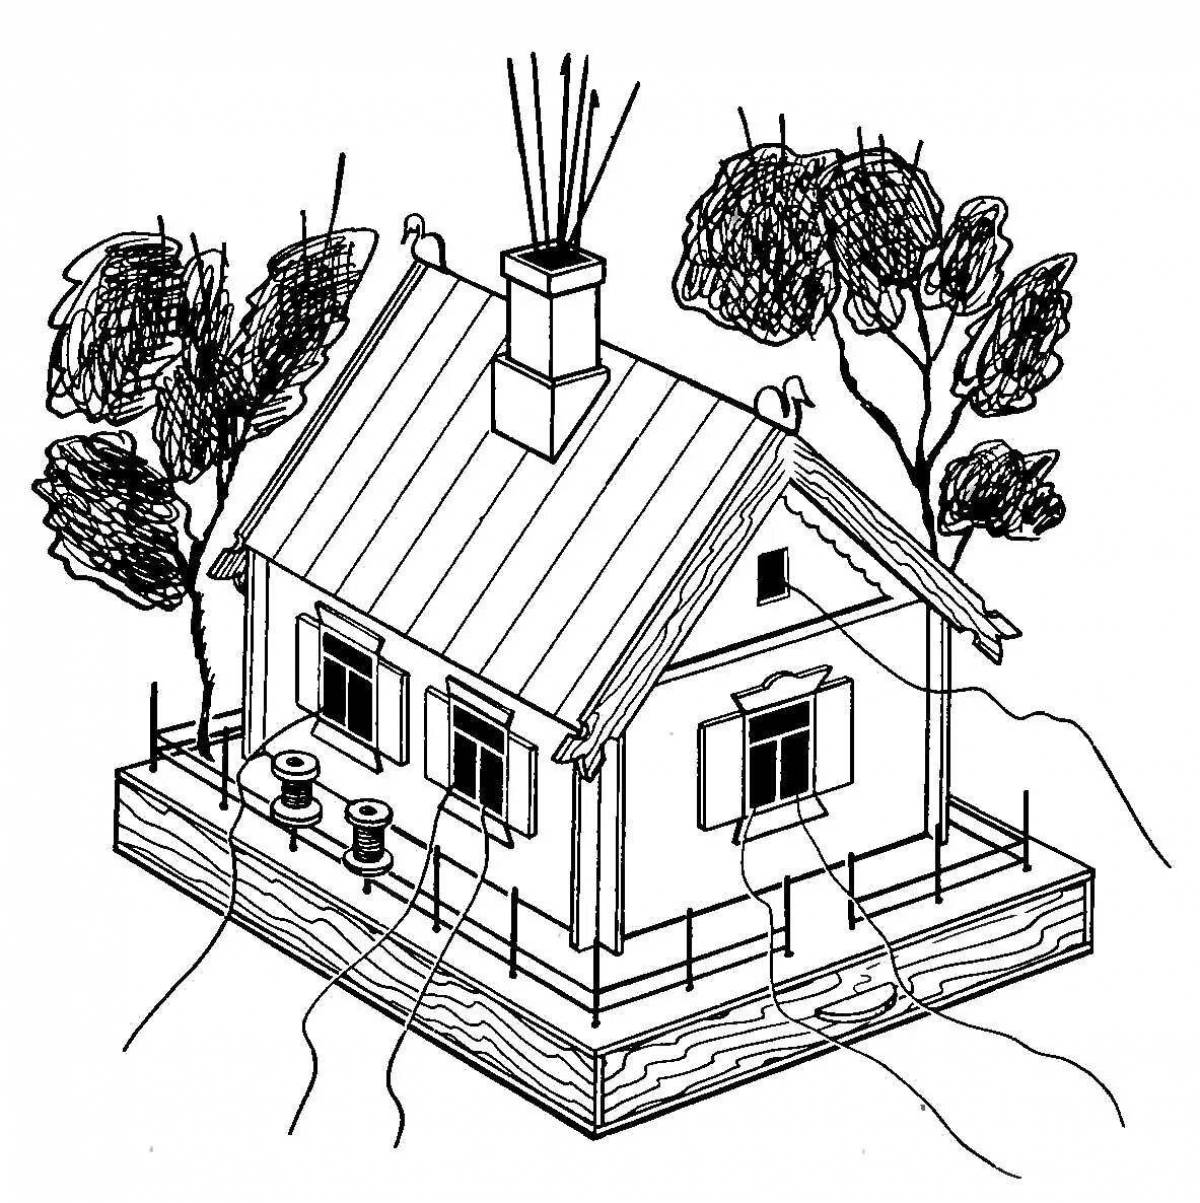 Coloring page charming country house